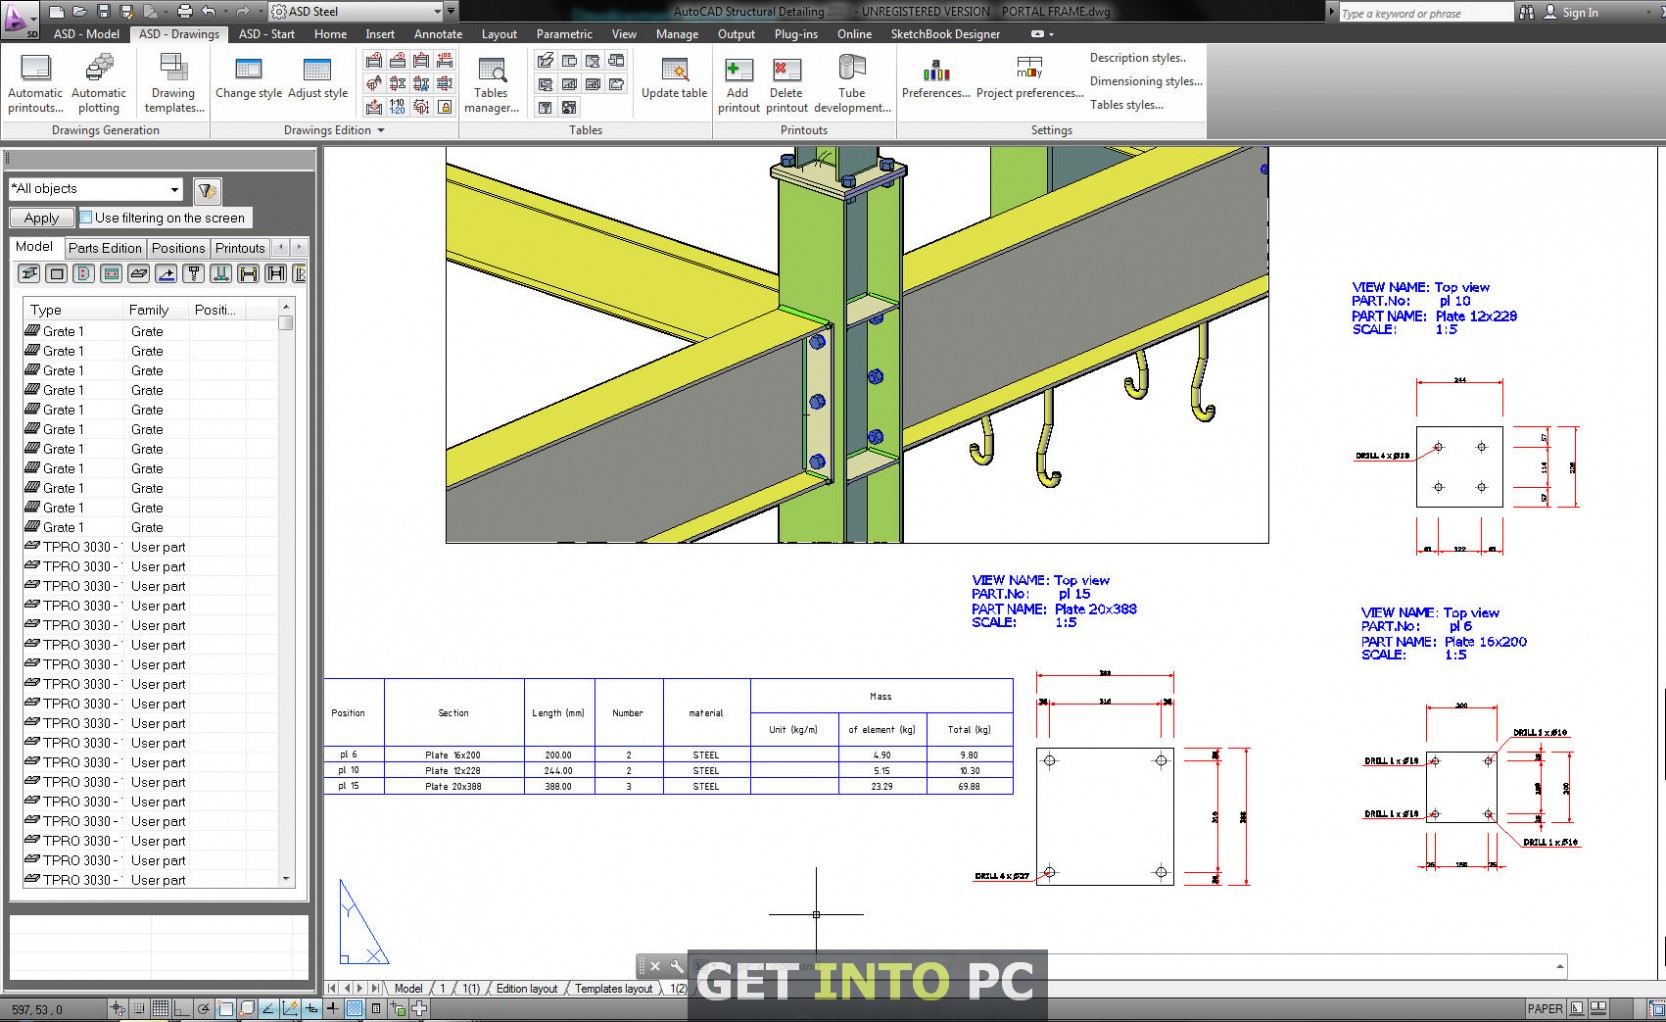 autocad structural detailing 2015 youtube